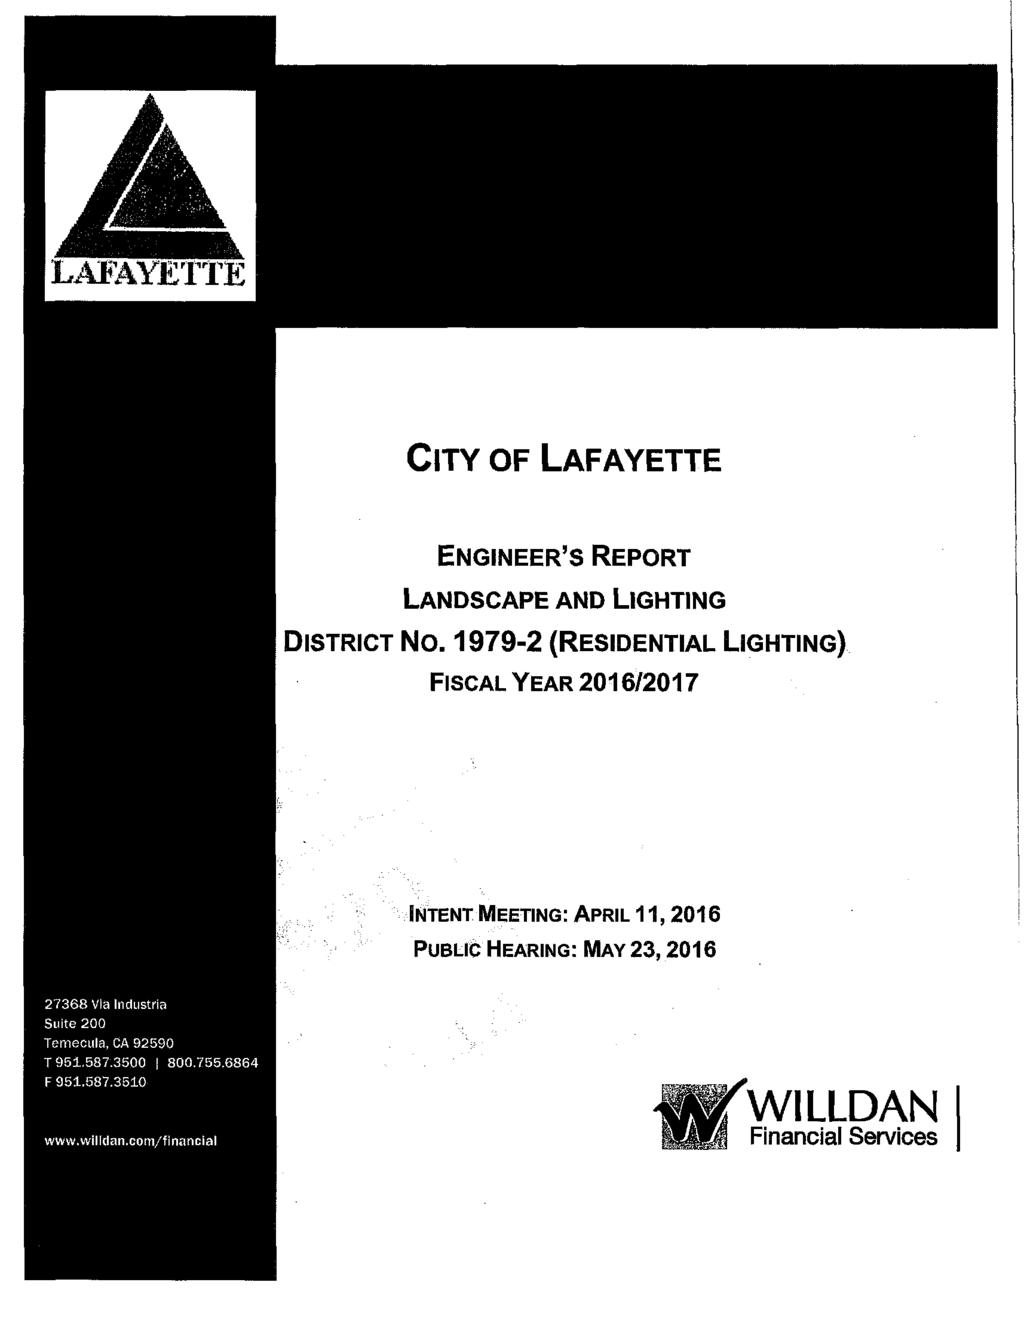 CITY OF LAFAYETTE ENGINEER'S REPORT LANDSCAPE AND LIGHTING DISTRICT NO.